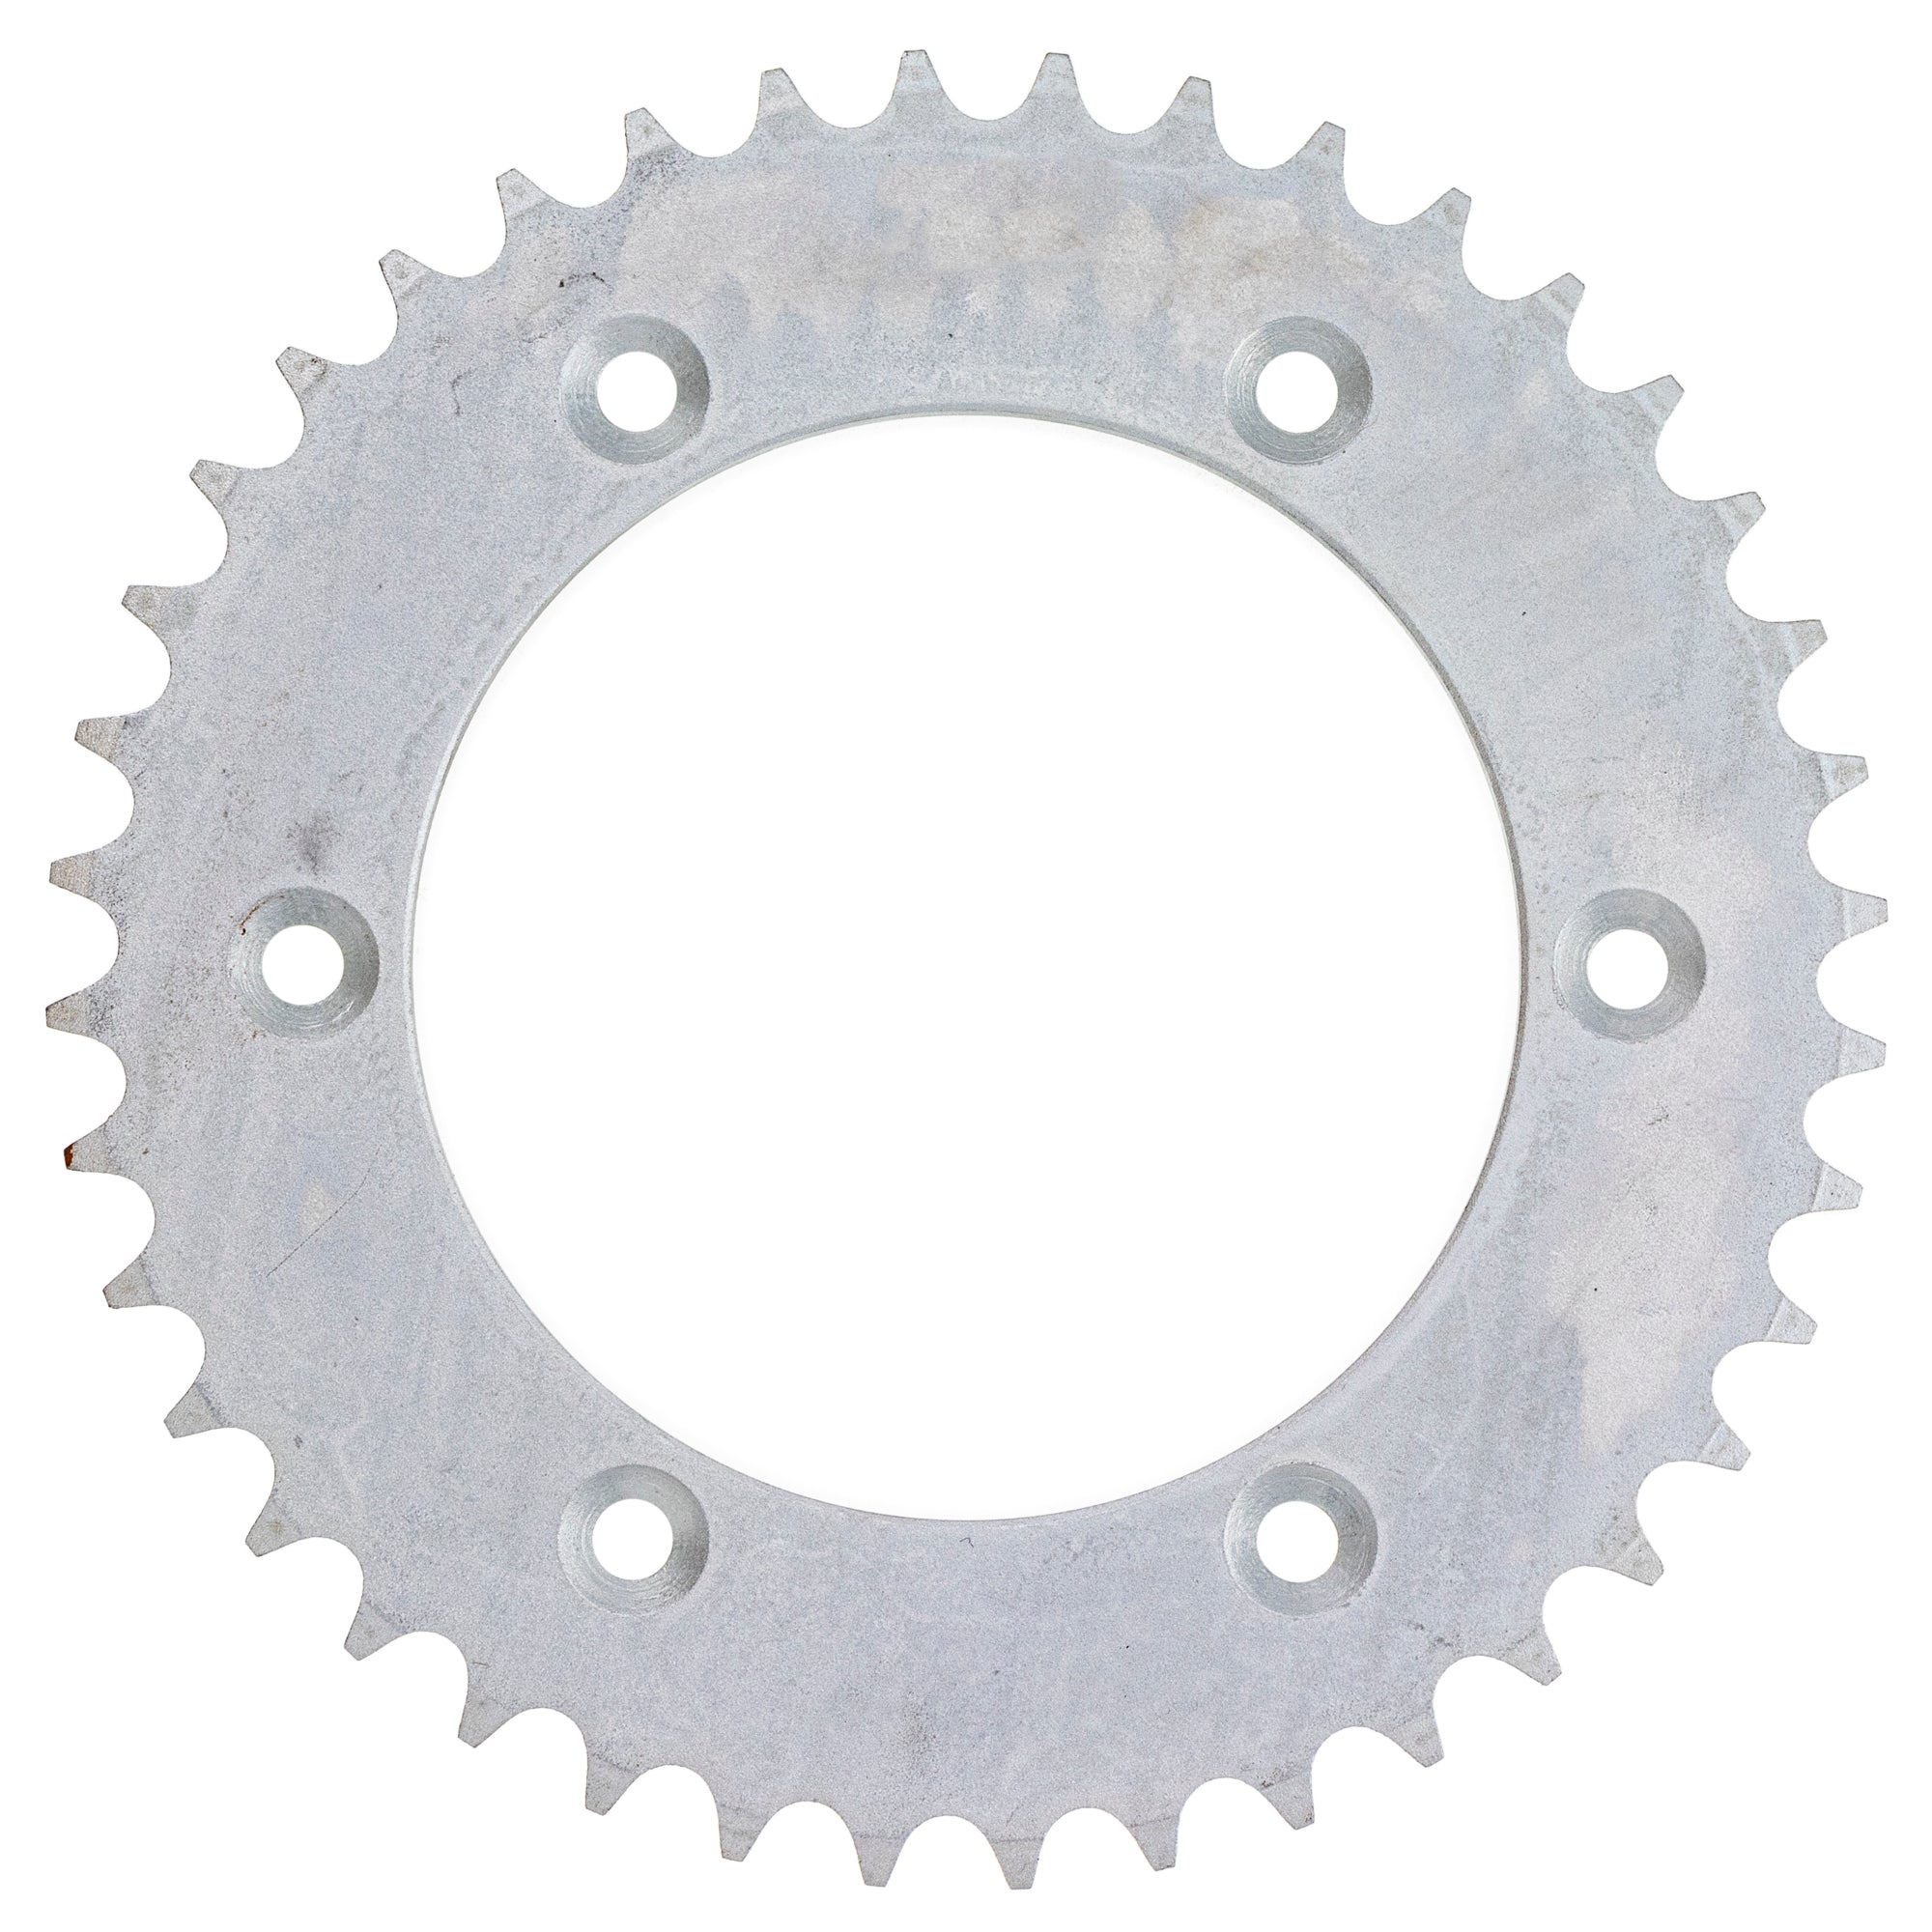 520 Pitch Front 15T Rear 40T Drive Sprocket Kit for Husaberg FS 650E